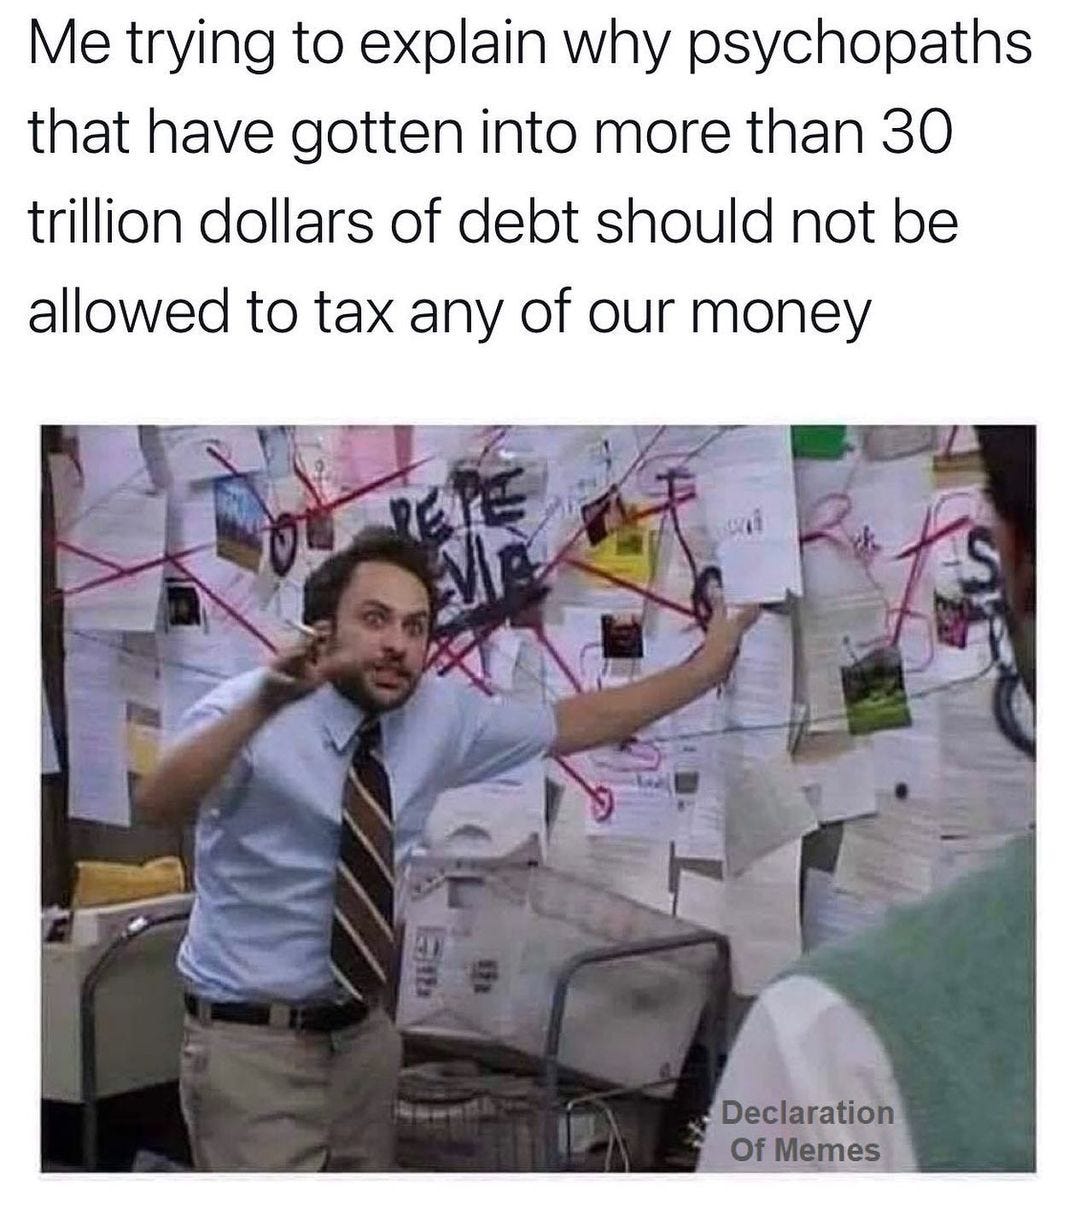 May be an image of 1 person and text that says 'Me trying to explain why psychopaths that have gotten into more than 30 trillion dollars of debt should not be allowed to tax any of our money Declaration Of Memes'